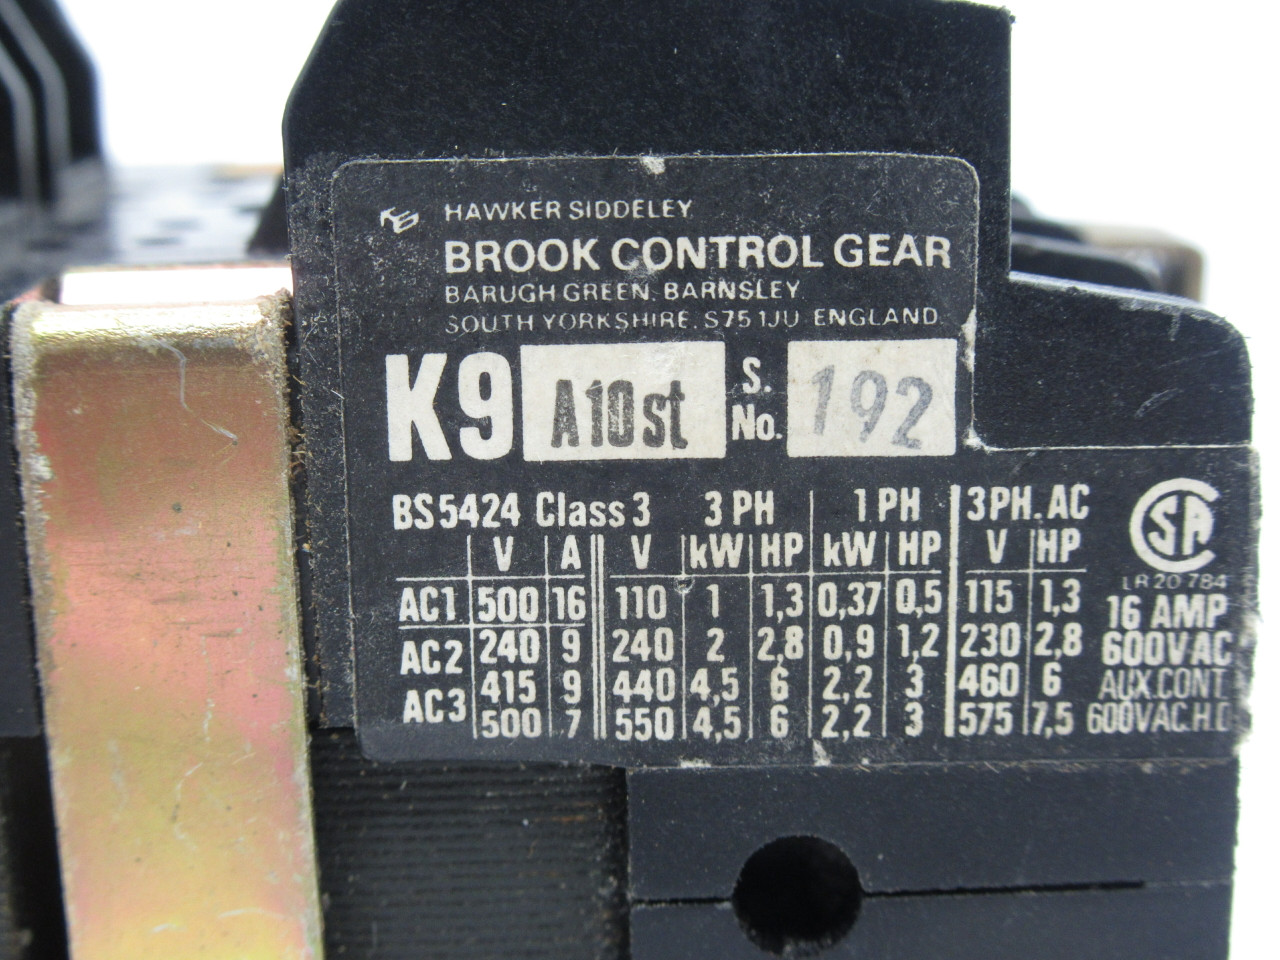 Brook Control Gear K9A10ST Contactor 16A Coil 415V 50Hz USED